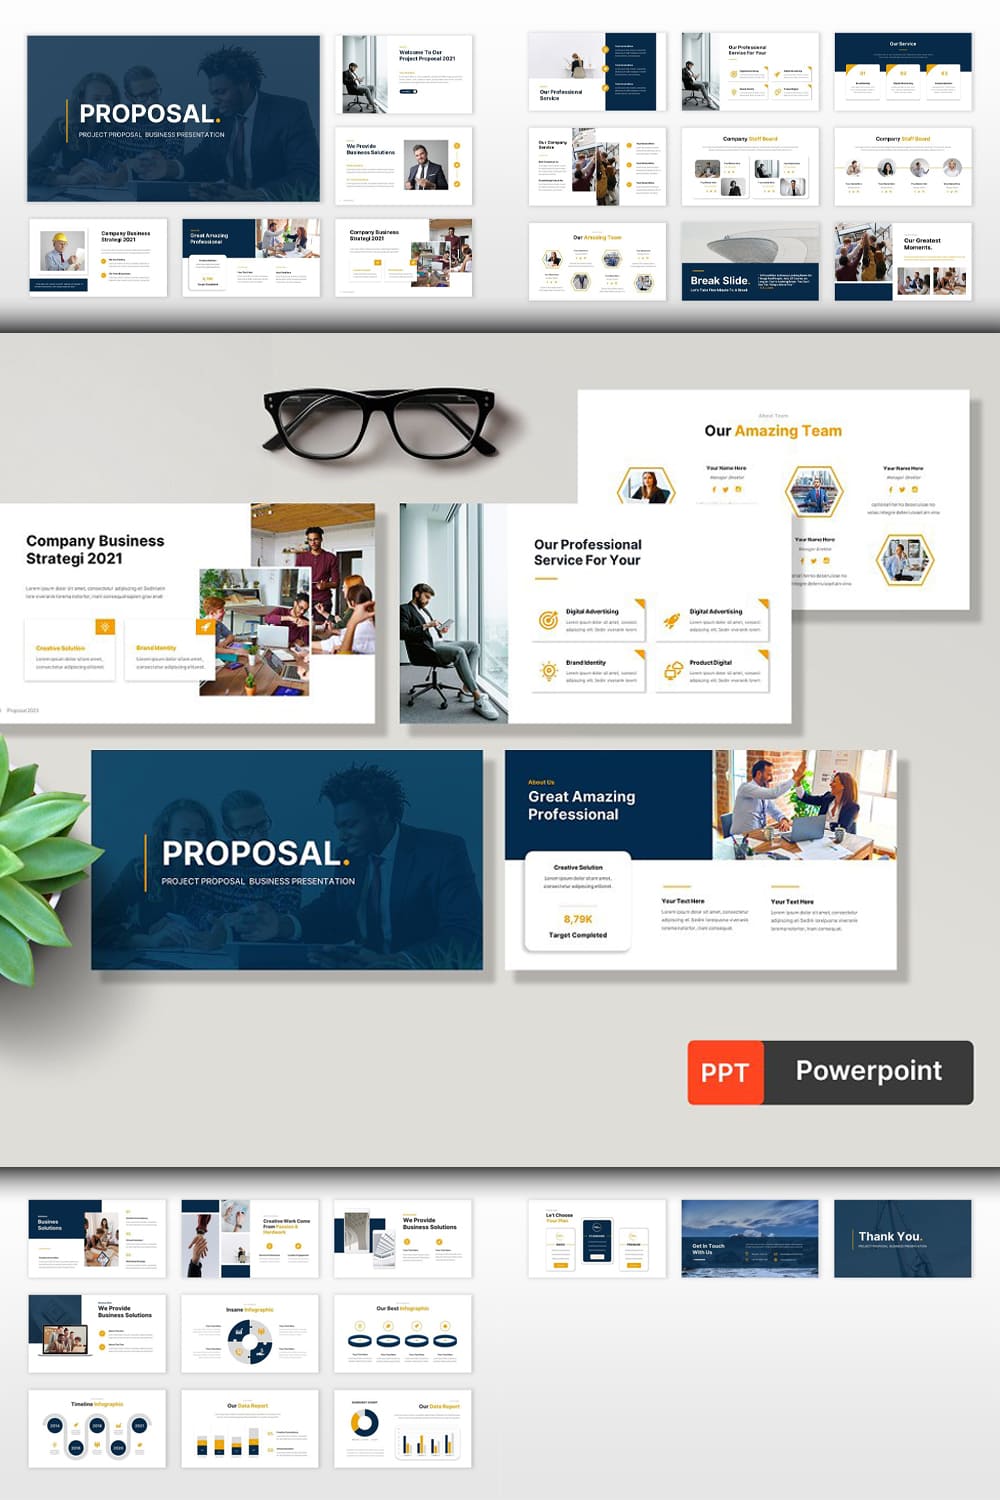 Project Proposal PowerPoint Template pinterest image.